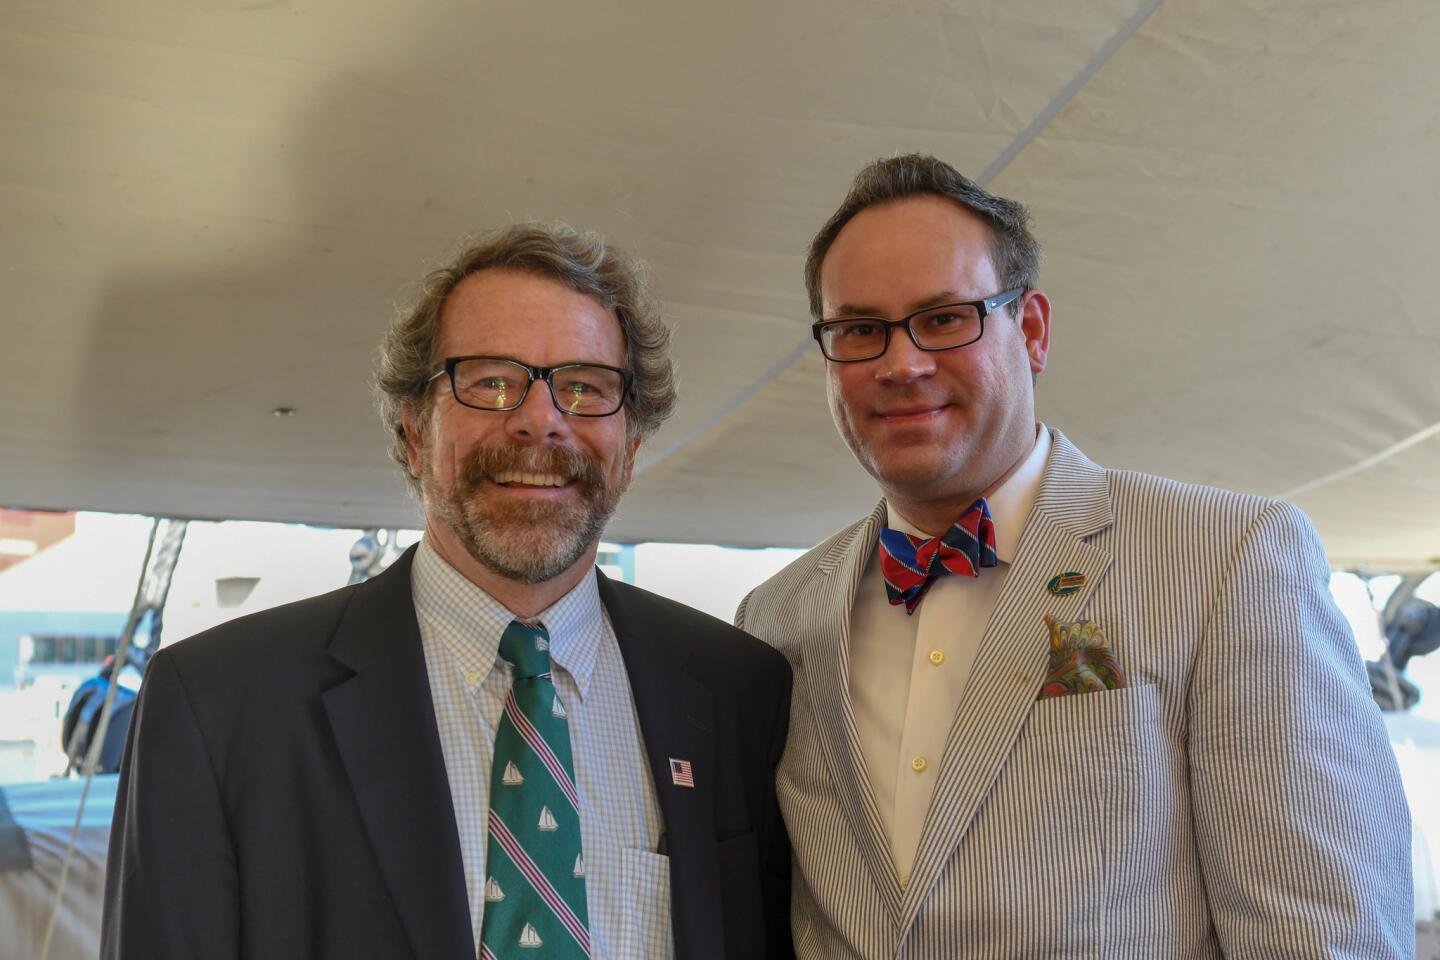 Chris Rowsom, left, and John Pastalow attended Historic Ships Captain's Jubilee on board the USS Constellation.